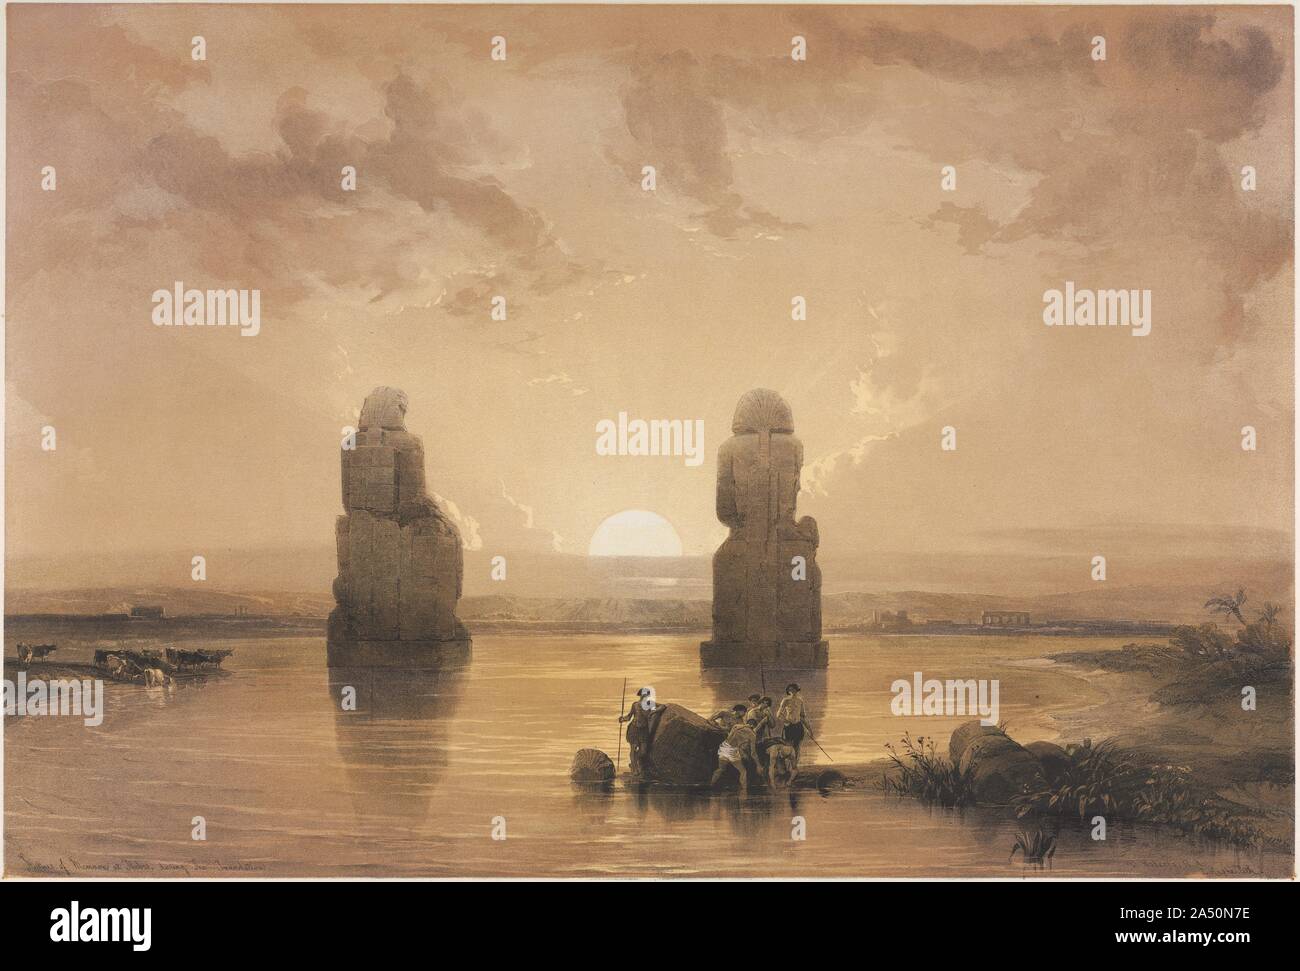 Egypt and Nubia, Volume II: Statues of Memnon at Thebes, during the Inundation, 1848. By the mid 19th century, the complexities of printing in numerous colours had been mastered, culminating in one of the high points of European printmaking. The plates drawn by Haghe, which copy the watercolours that David Roberts made in Egypt, are exquisite examples of colour lithography. Egypt was a distant, mysterious country for Europeans and Haghe, a Scottish topographical and architectural artist who spent the year of 1838 traveling across this ancient land. The resulting prints&#x2014;the first compreh Stock Photo